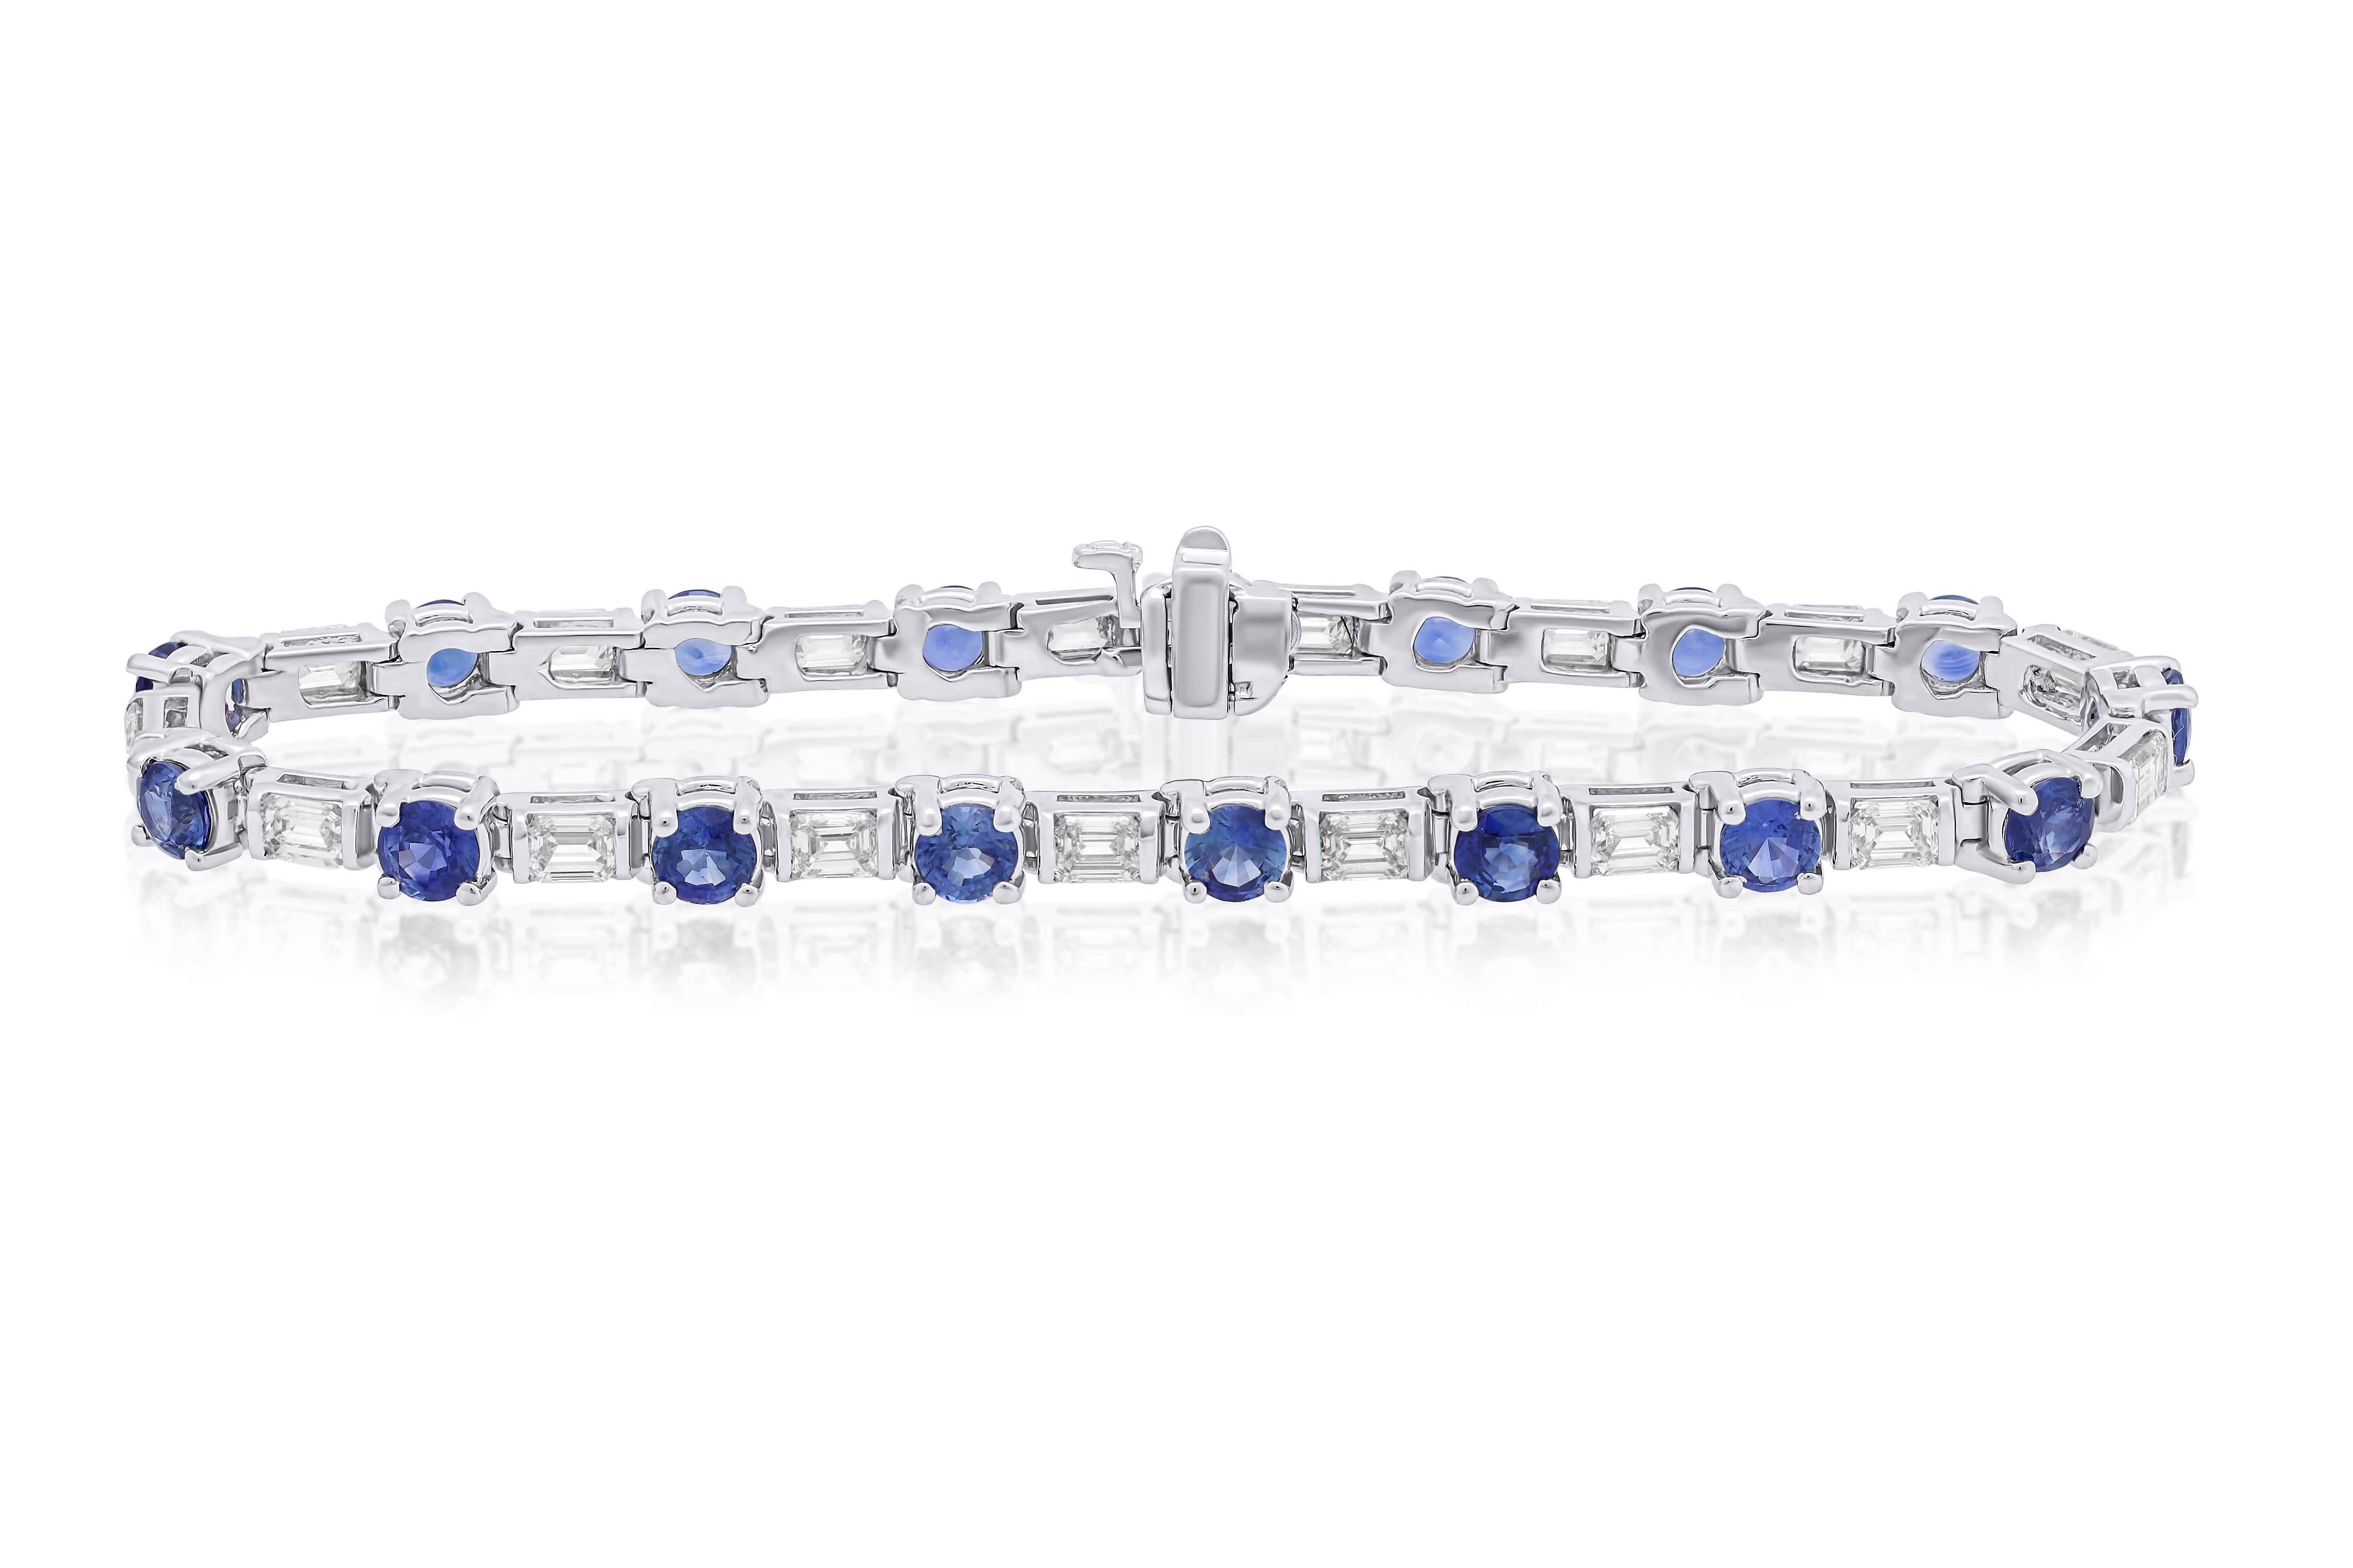 18 kt white gold sapphire and diamond eternity bracelet adorned with 5.90 cts tw of round sapphires separated by 4.45 cts tw of baguette cut diamonds